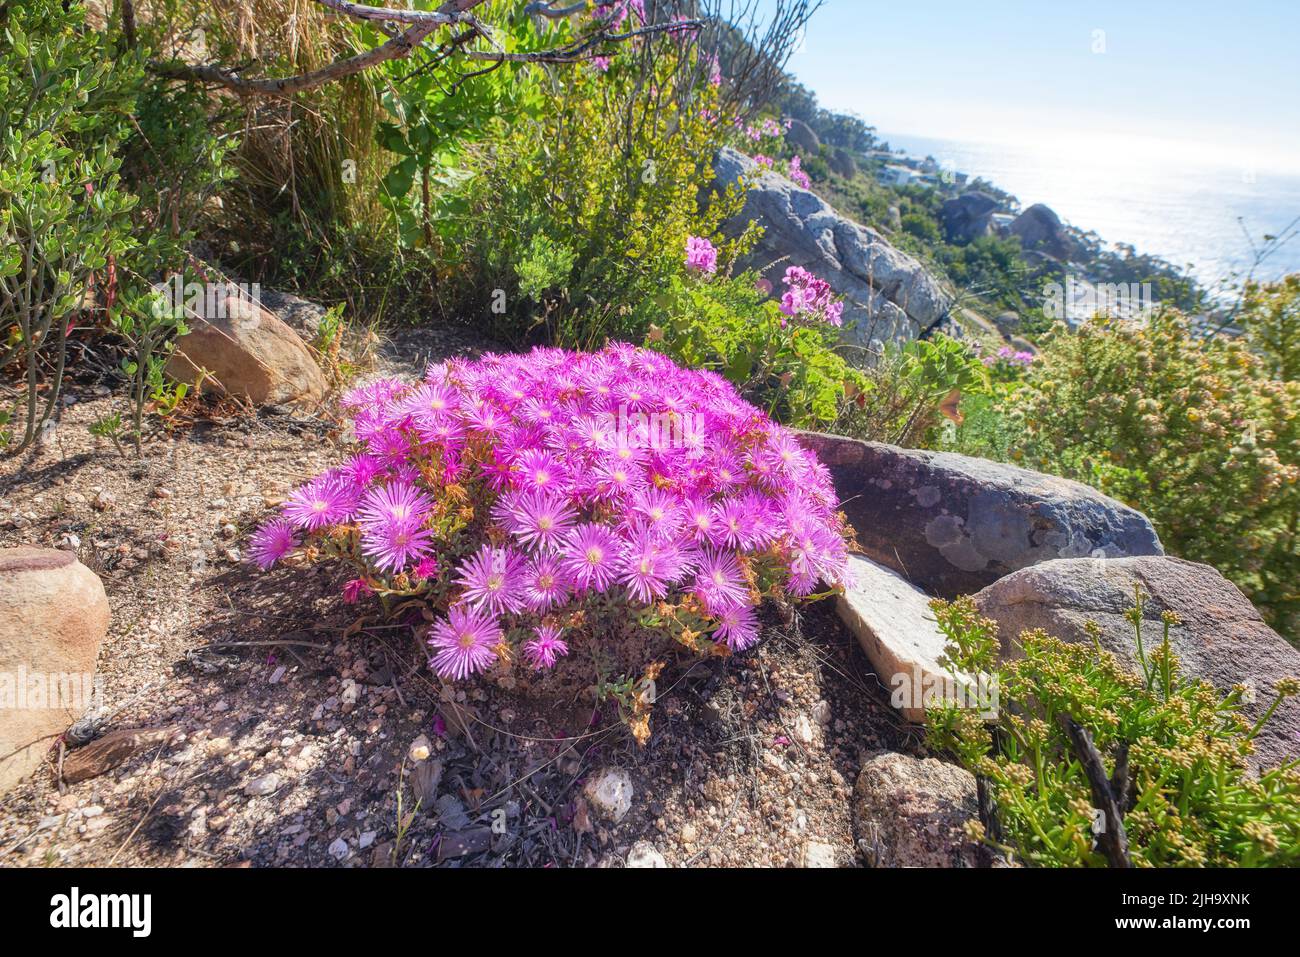 Pink aster fynbos flowers growing on rocks on Table Mountain, Cape Town, South Africa. Lush green bushes and shrubs with flora and plants in peaceful Stock Photo